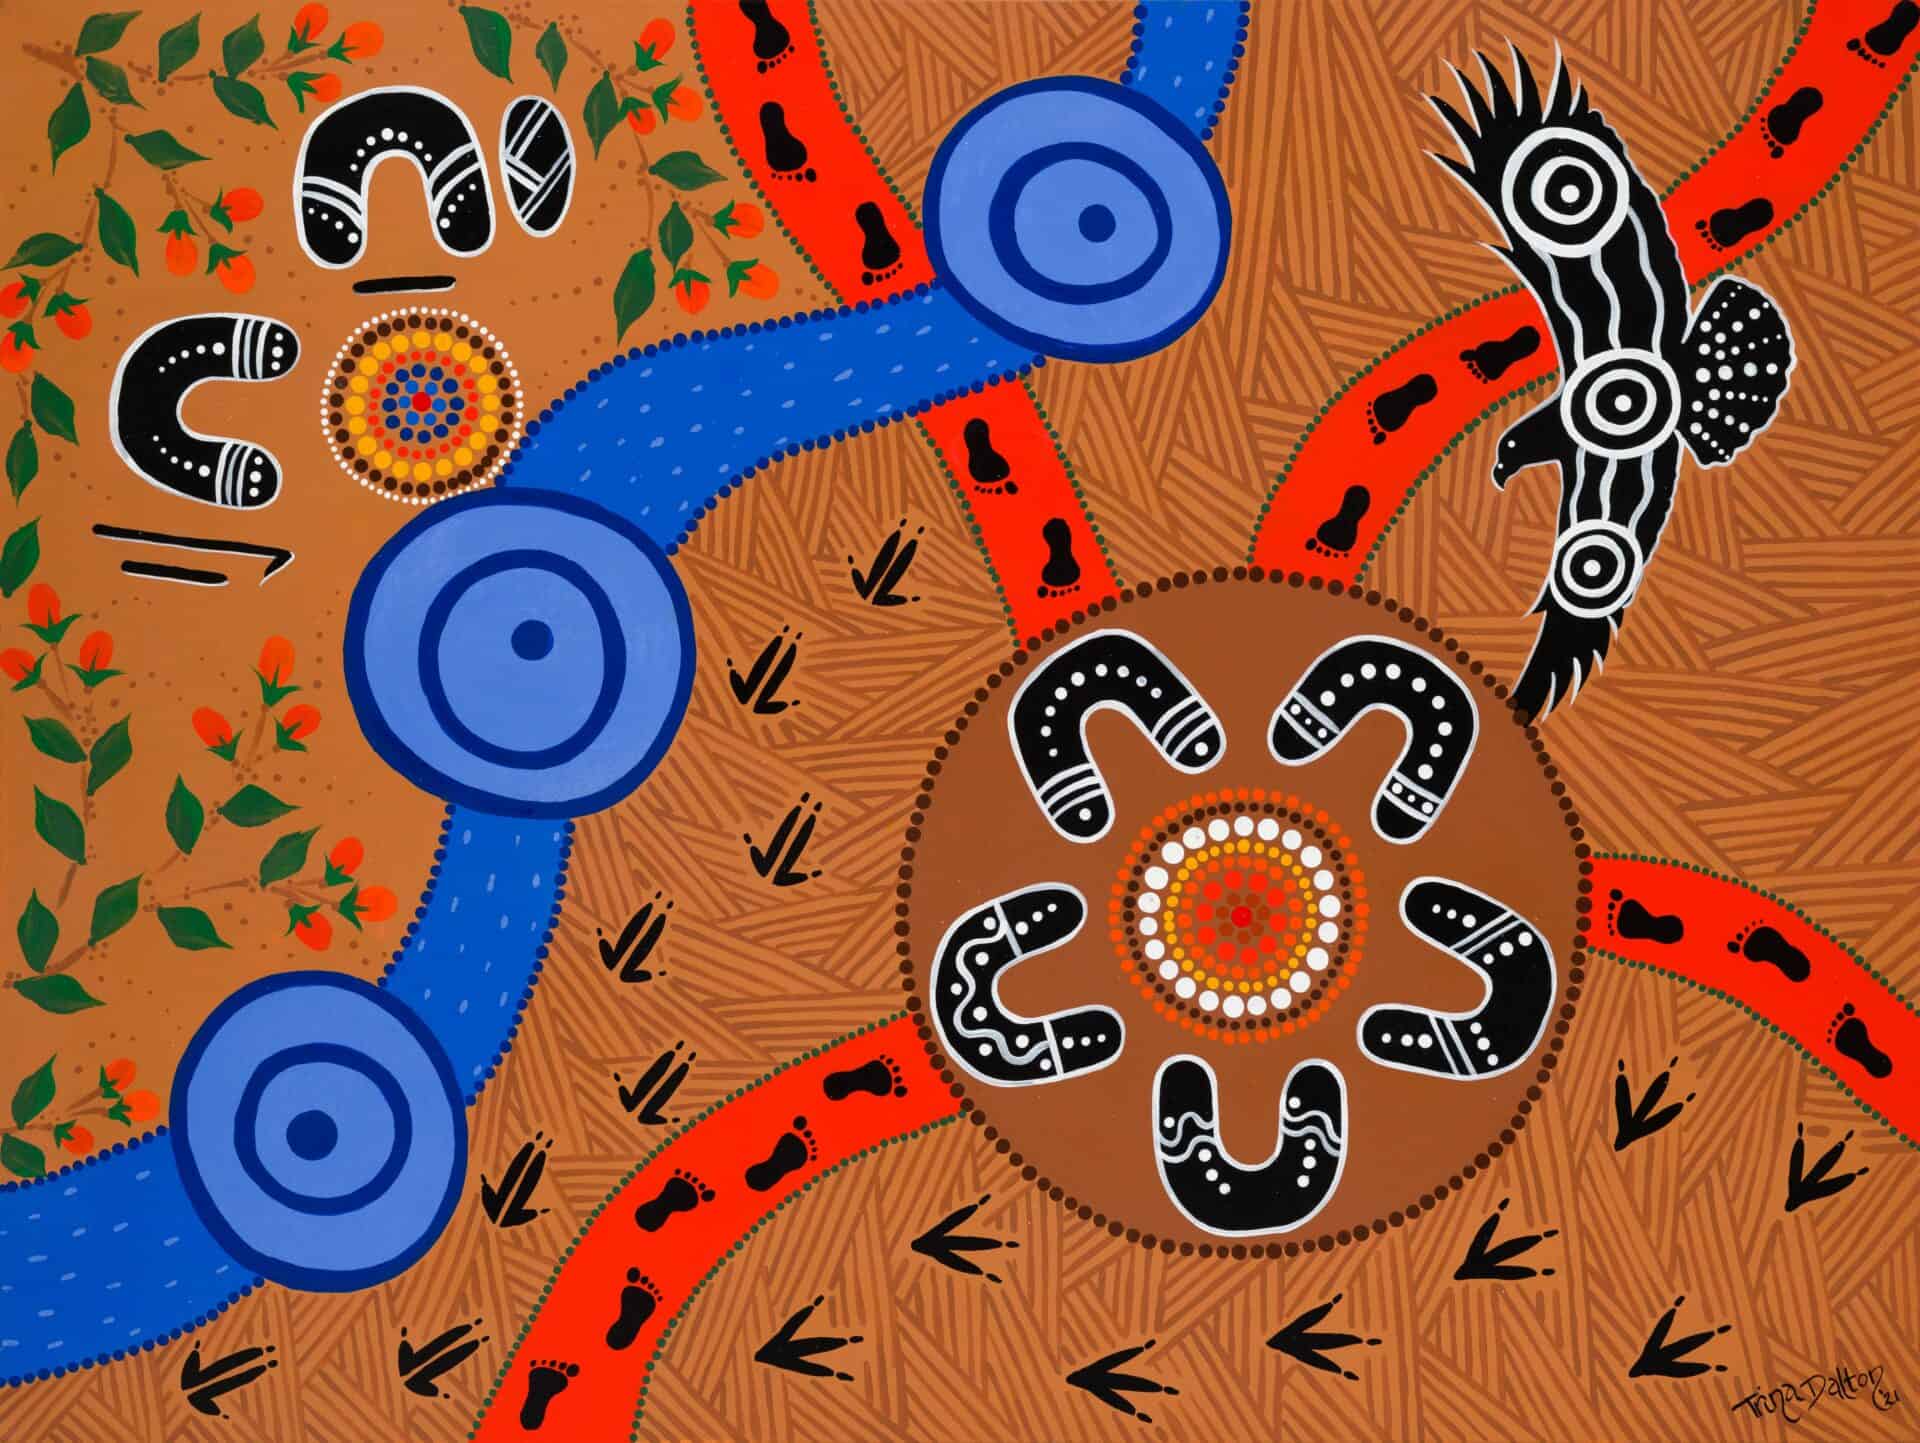 Artist: Trina Dalton-Oogjes Description by the artist: The Artwork shows the connection between Community, land and water. Bunjil and the Elders watching over the gatherings. Footprints, Emu and Kangaroo tracks are moving us forward, together, towards a new way of being.